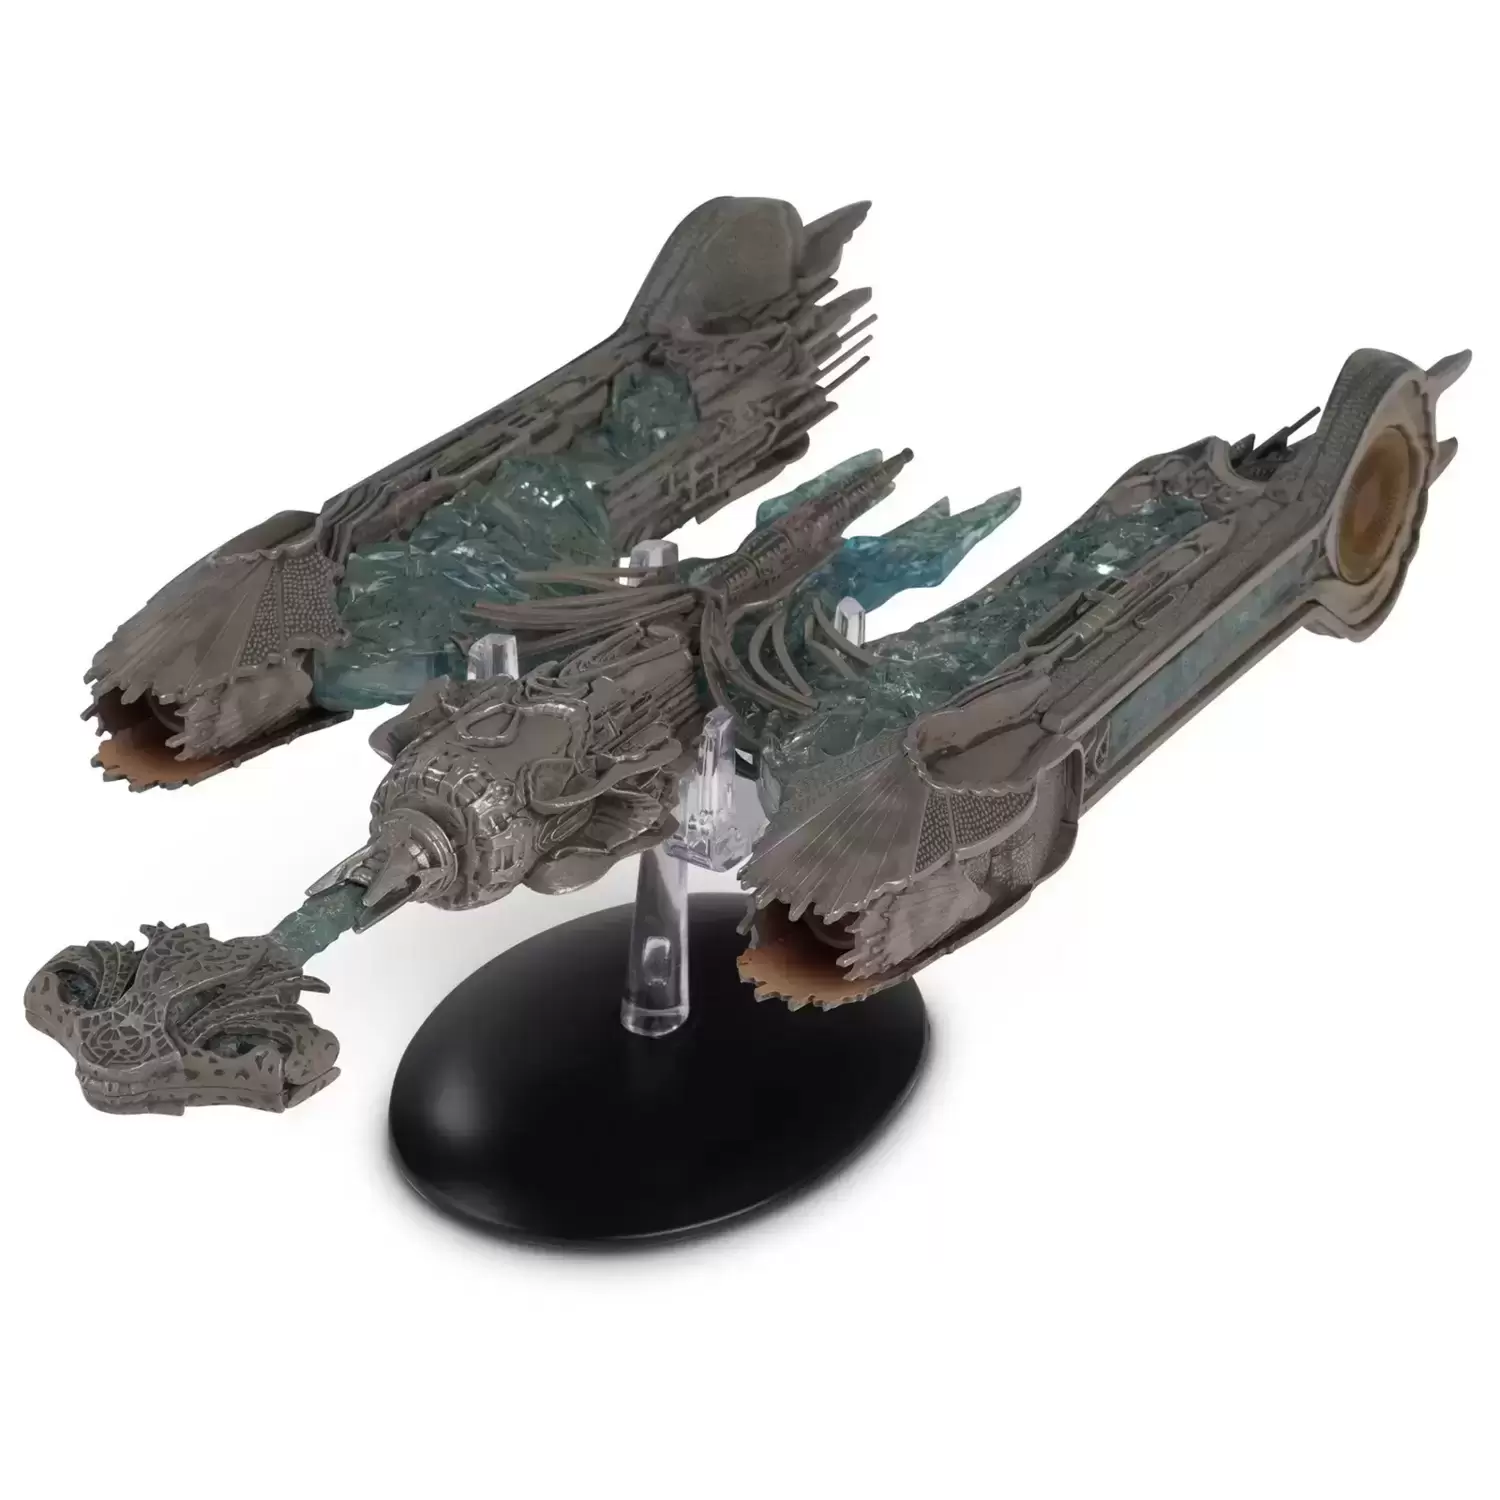 Star Trek Discovery The Official Starships Collection - Klingon Sarcophagus Starship (Ship of the Dead)